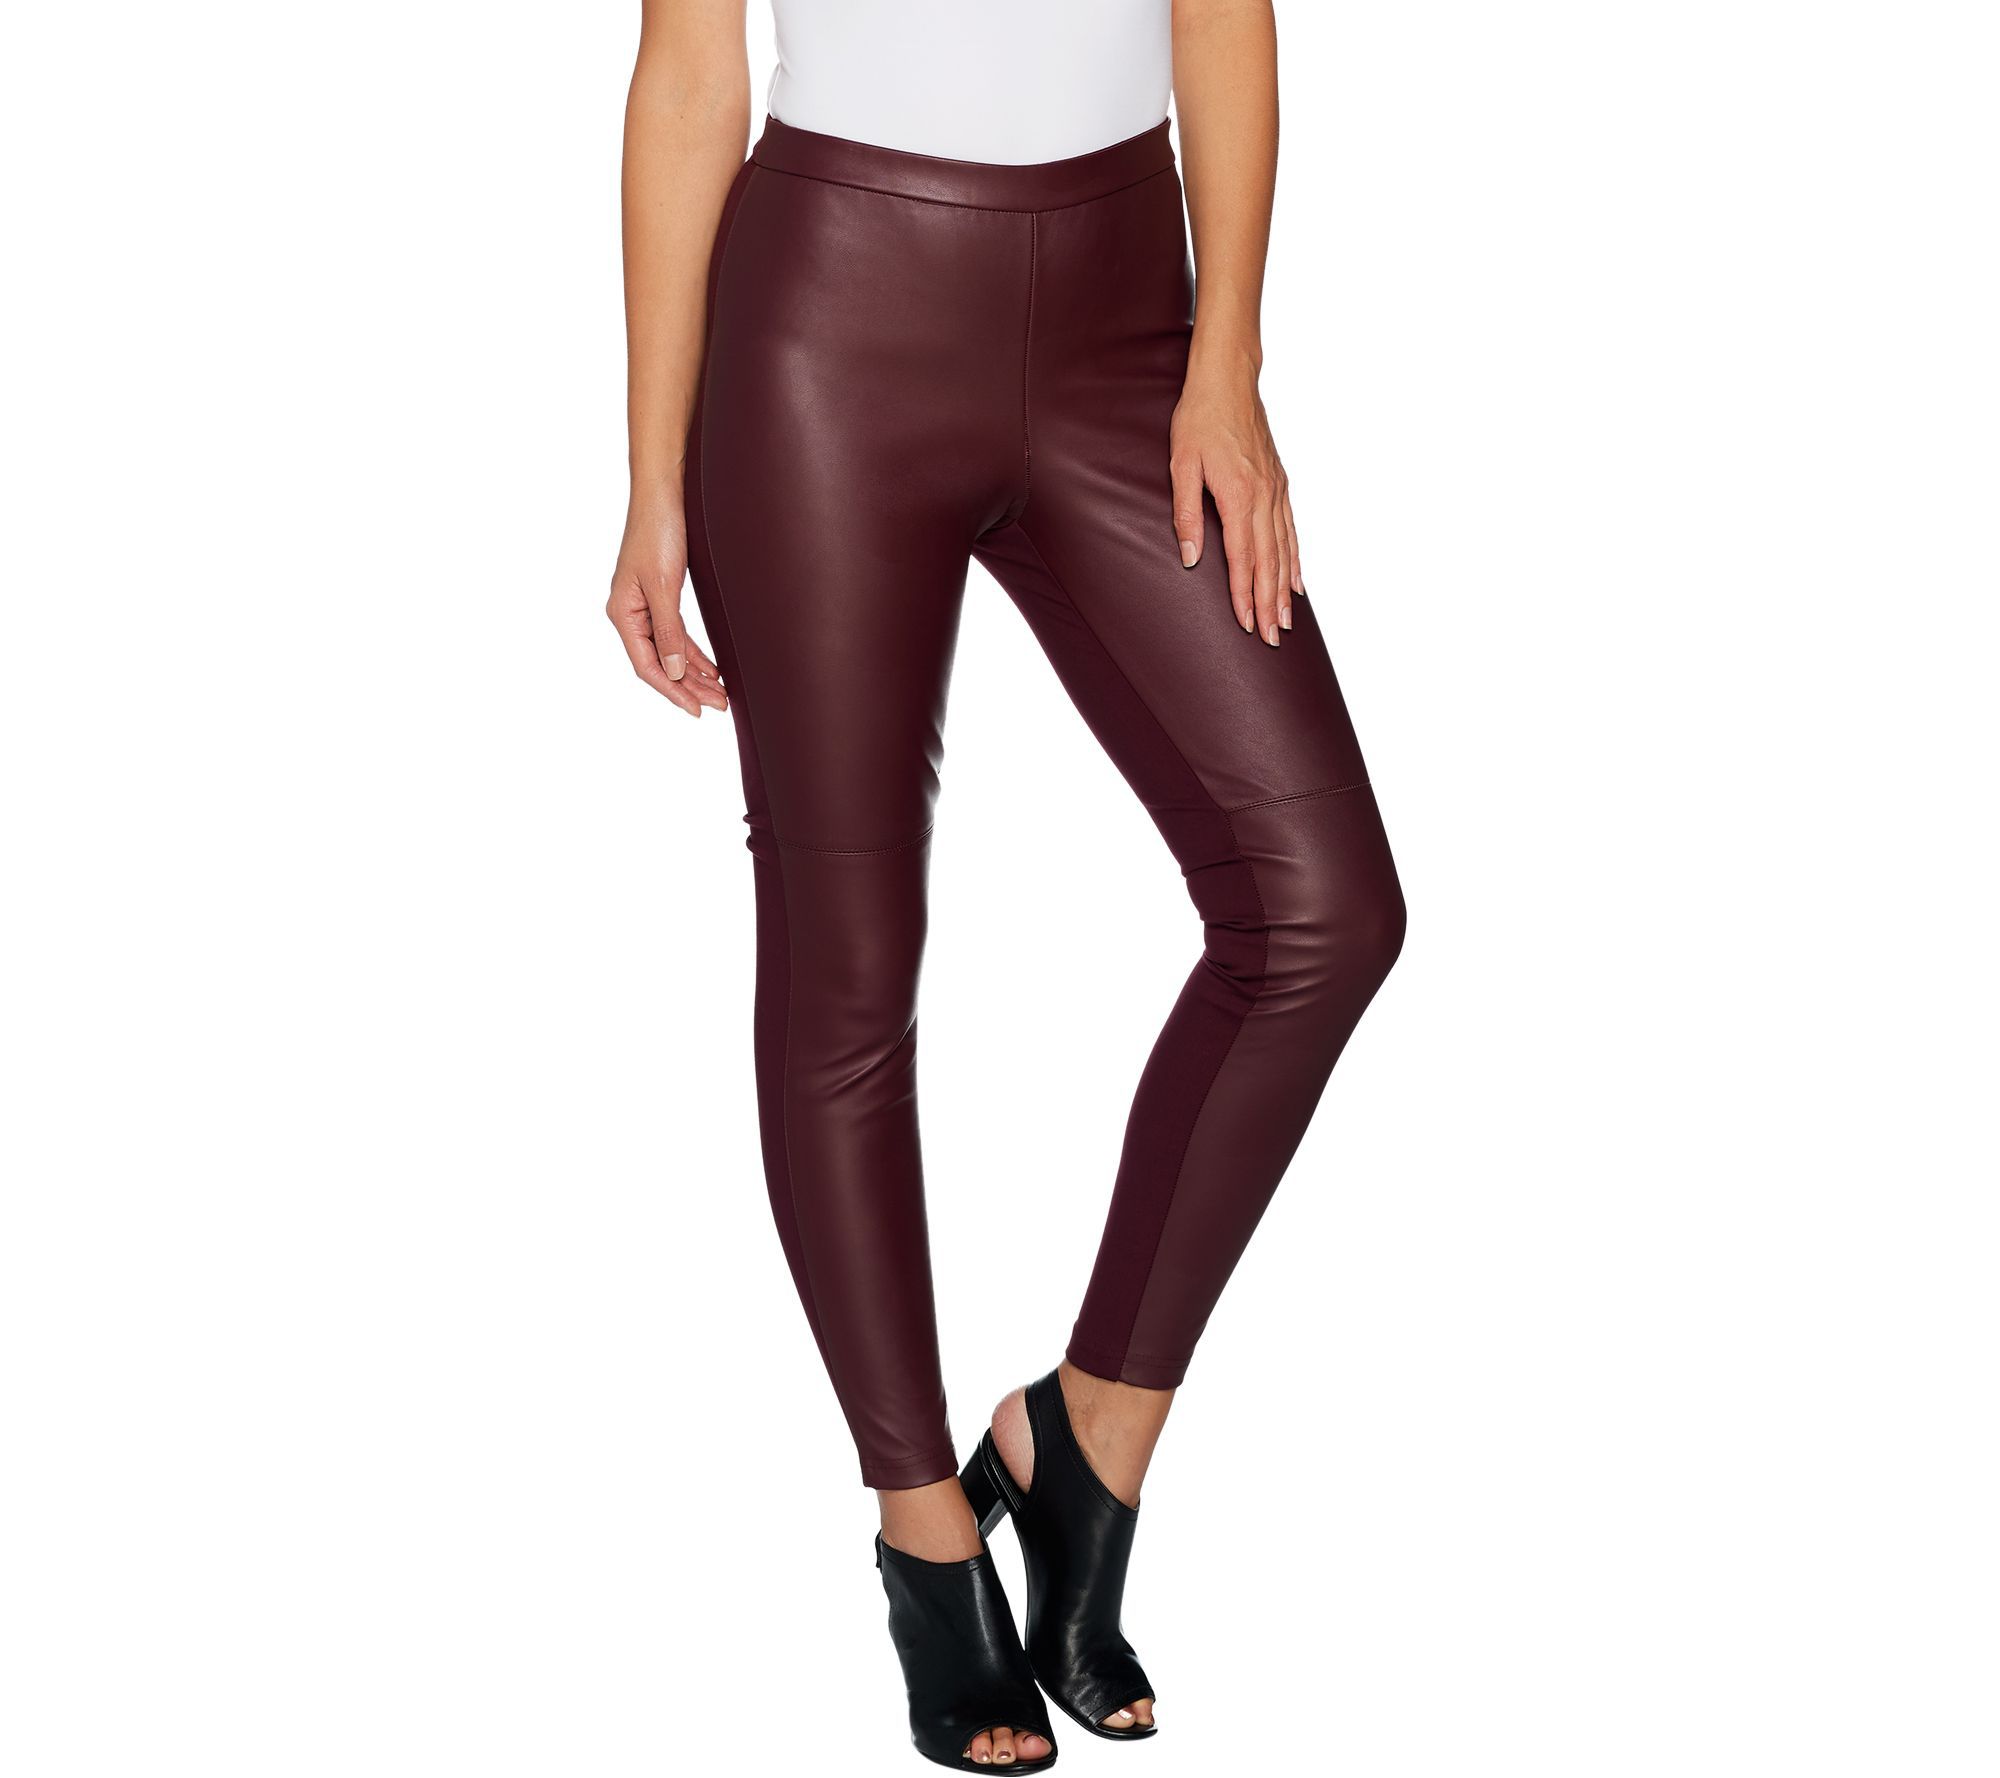 Graphic Tee + Leather Ponte Pants, cute & little